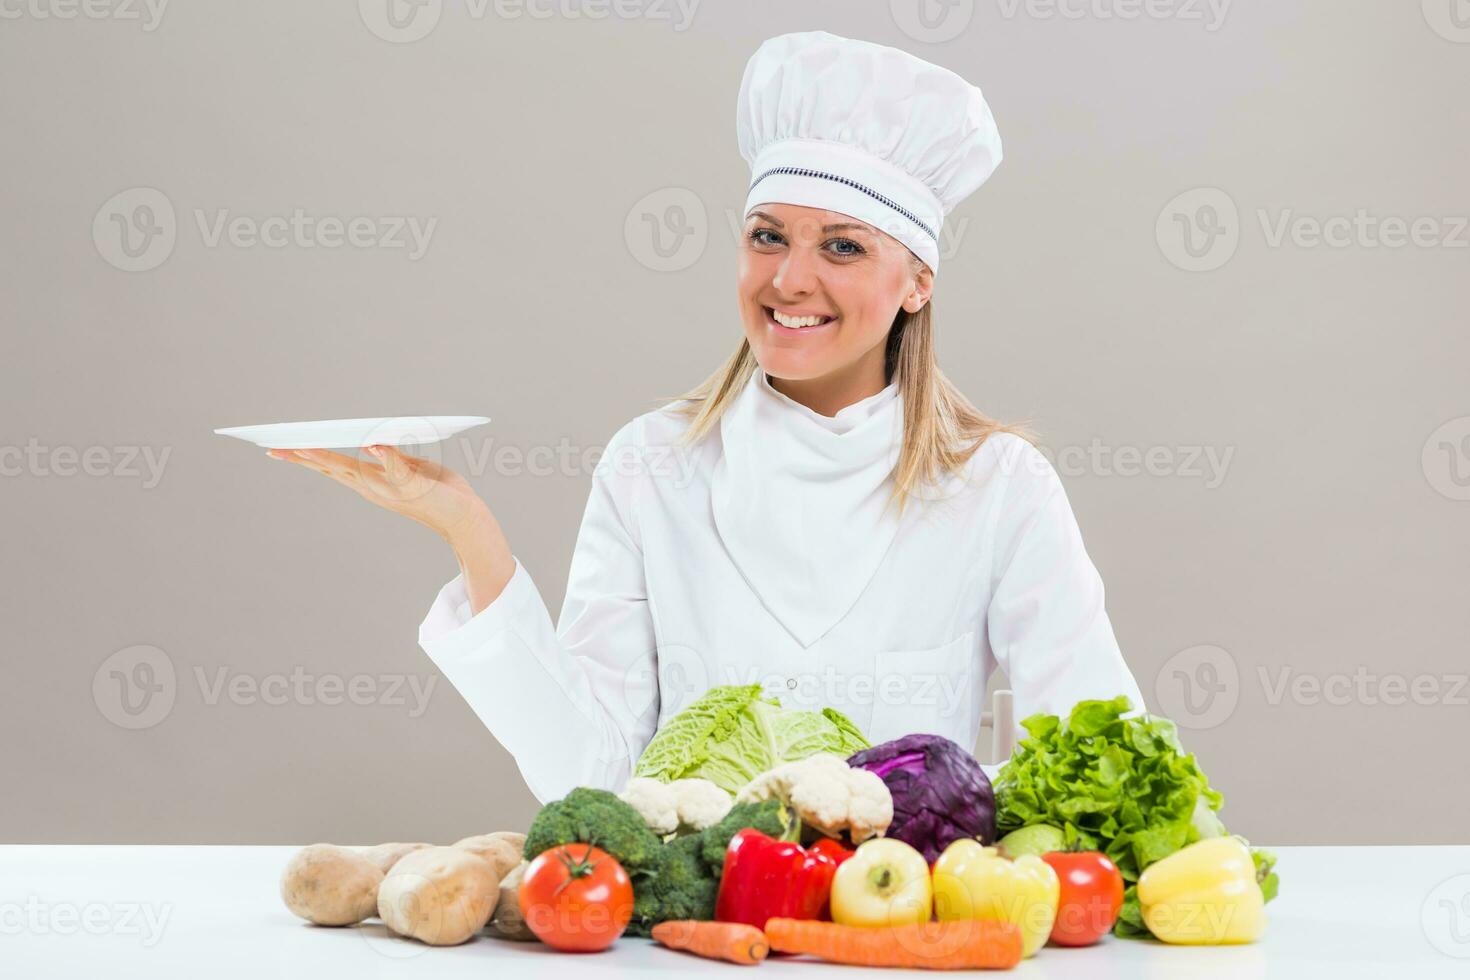 Female chef surrounded with vegetables holding plate. photo